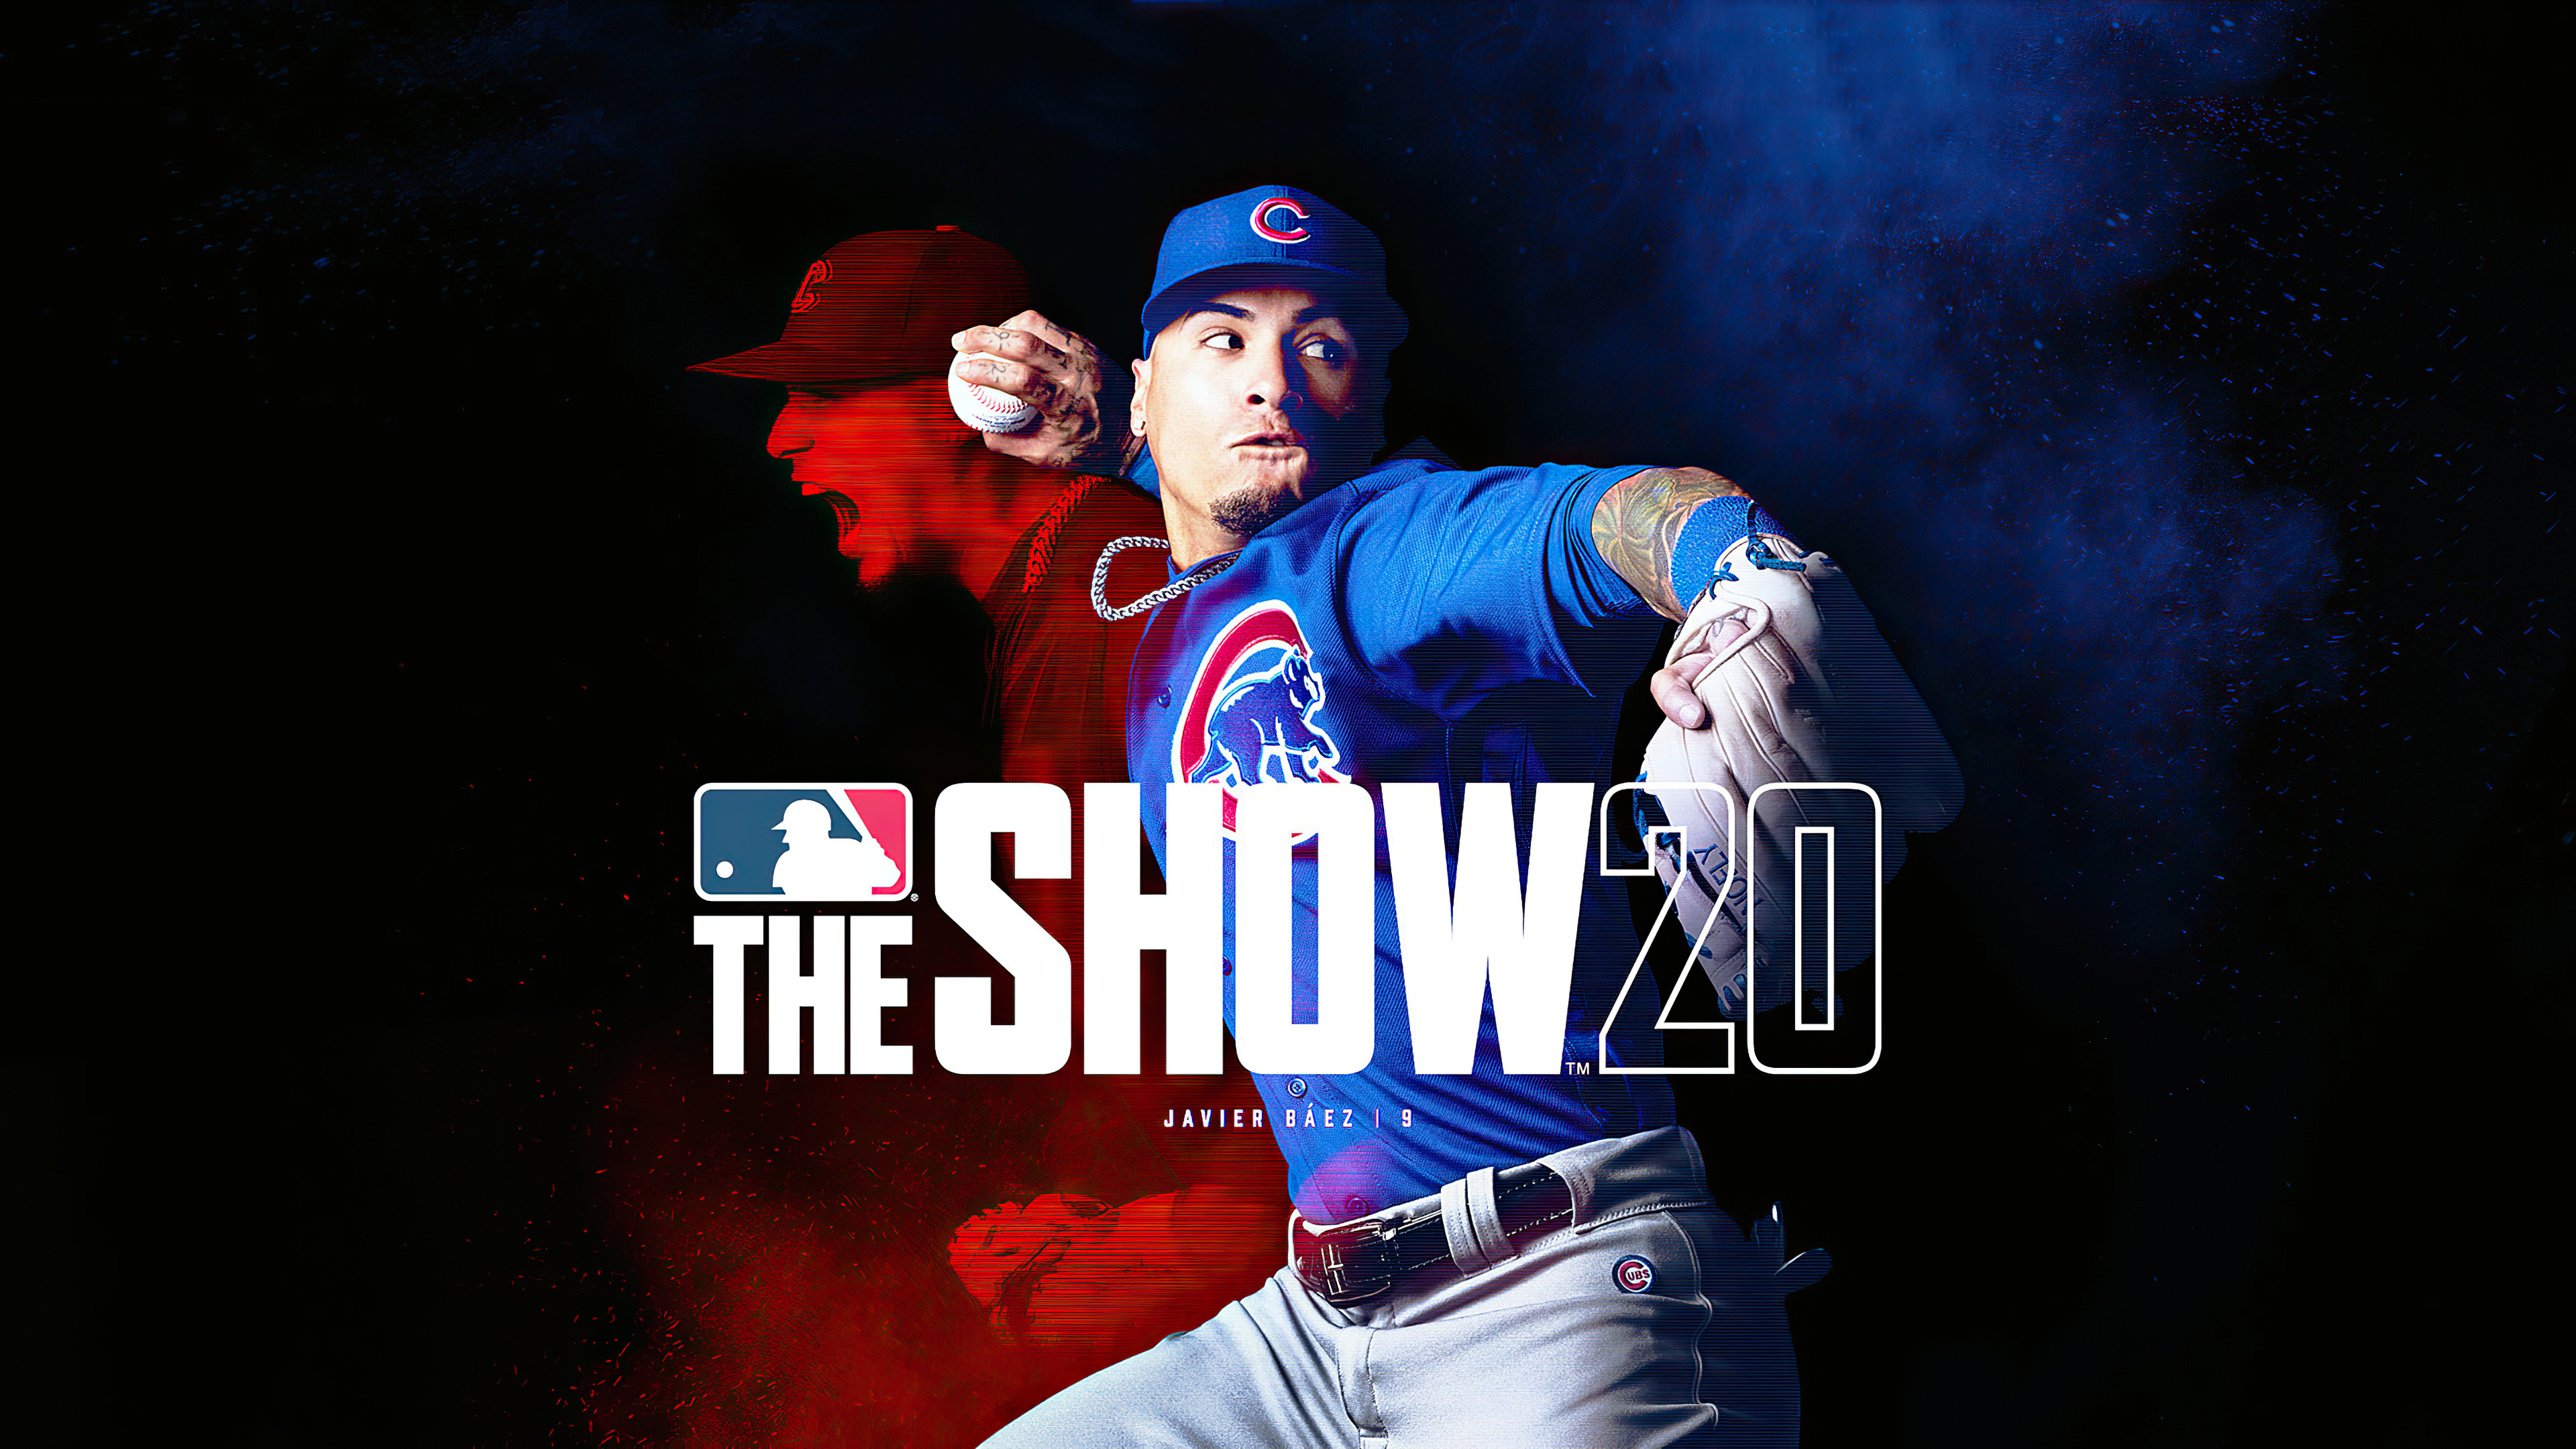 Mlb The Show Hd Games 4k Wallpapers Images Backgrounds Photos And Pictures